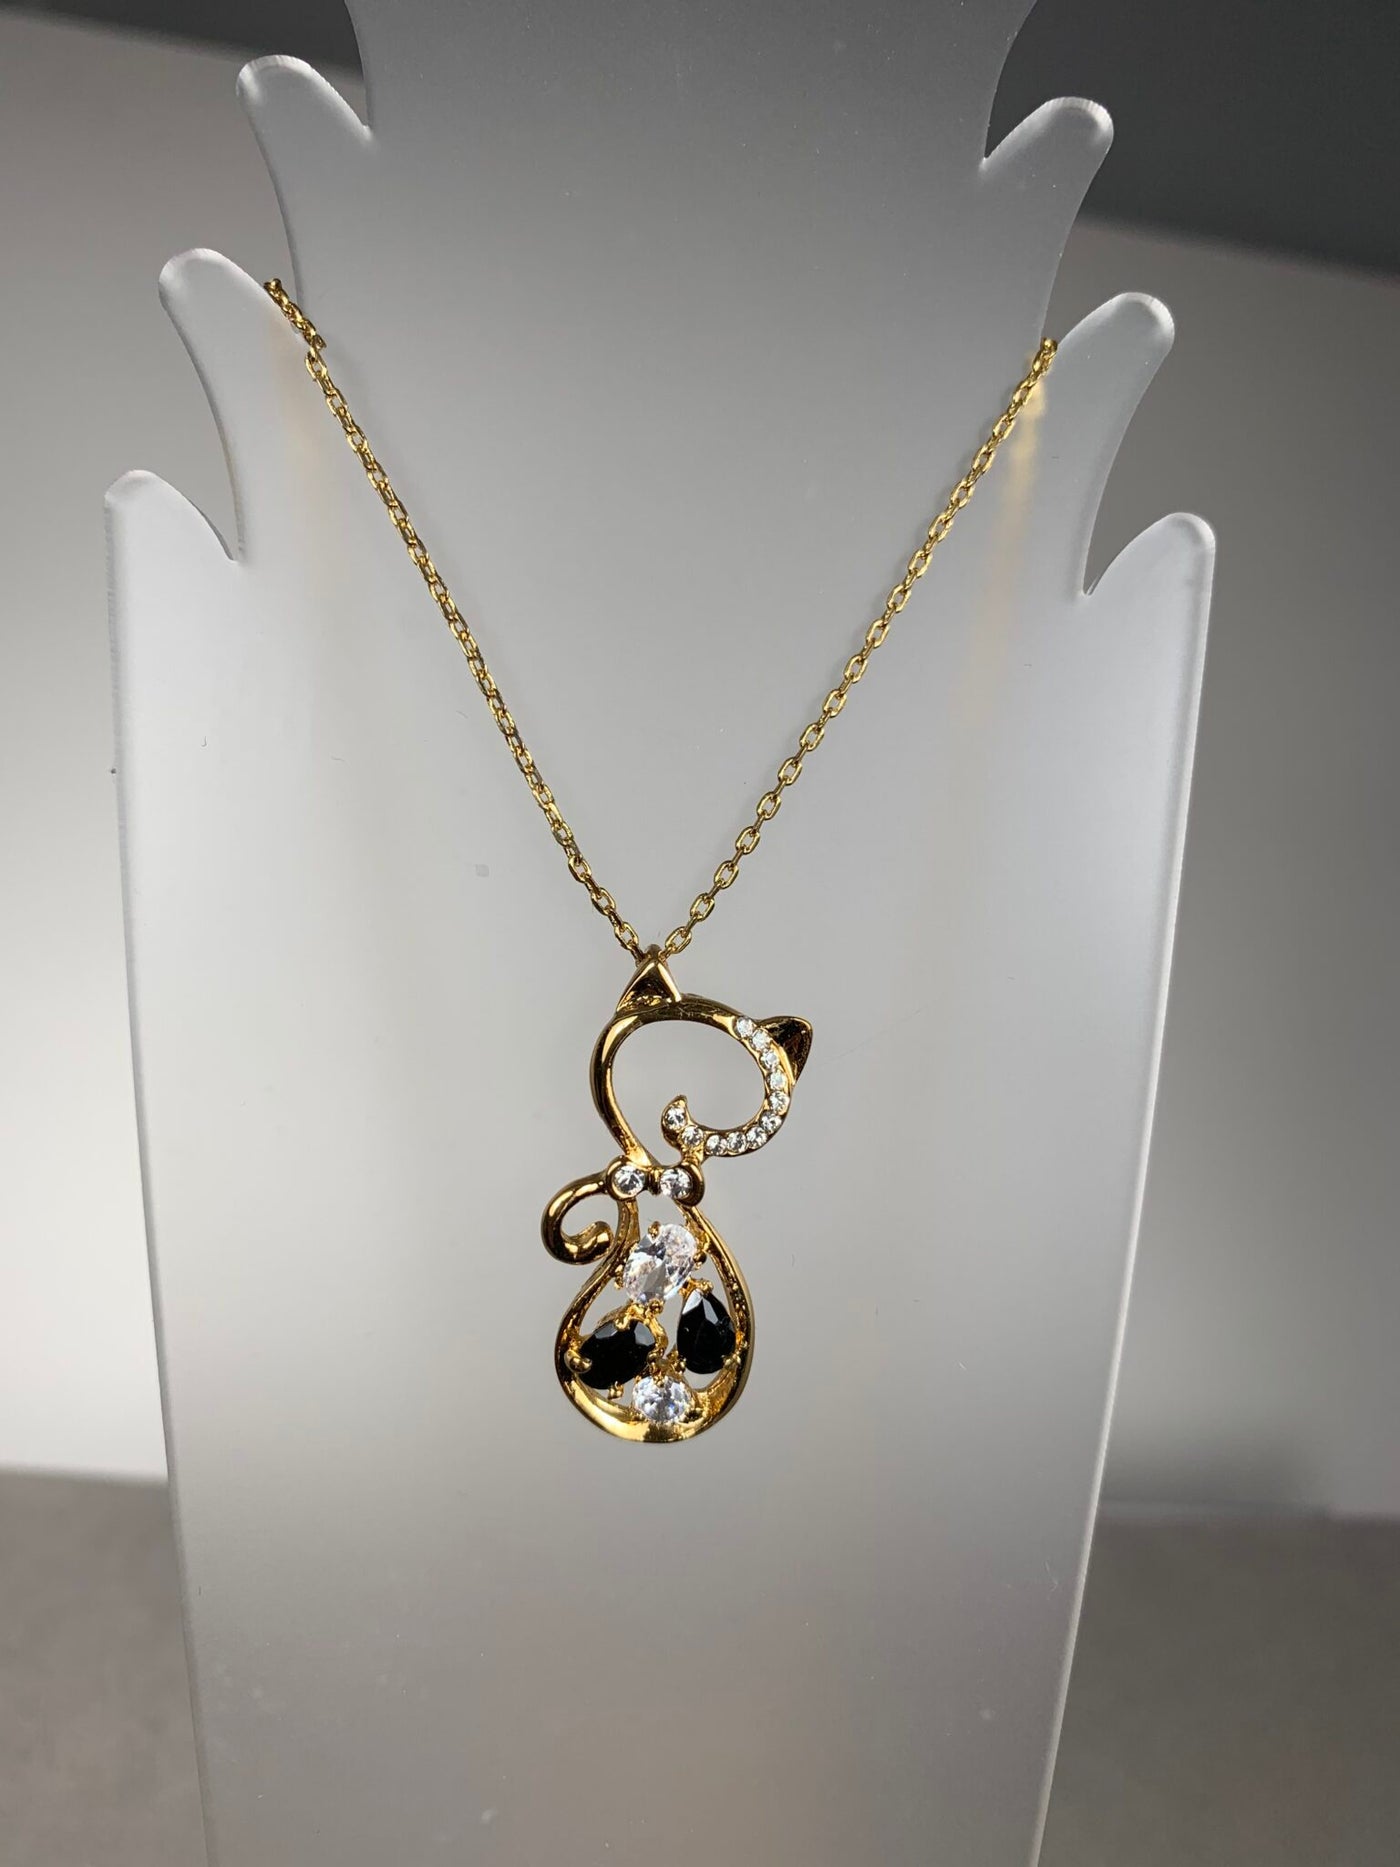 Cat Pendant and Chain Necklace in Yellow Gold Tone and Crystals